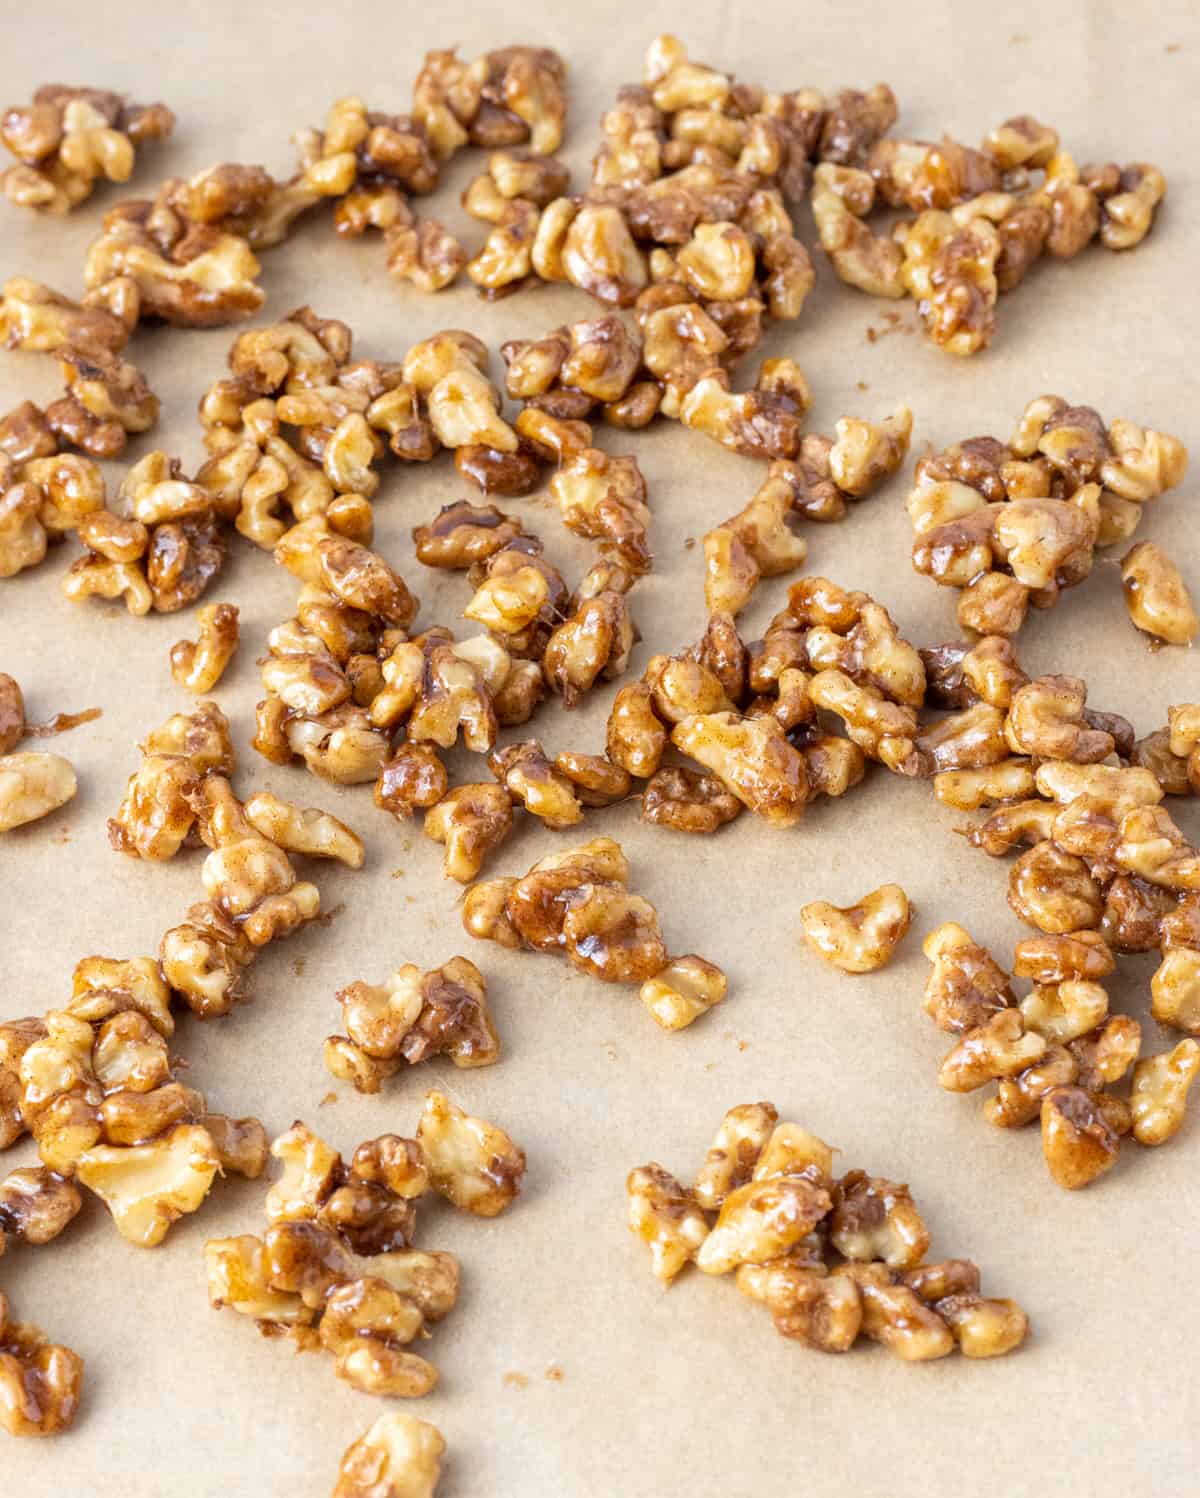 Candied walnuts on a parchment-lined baking sheet.